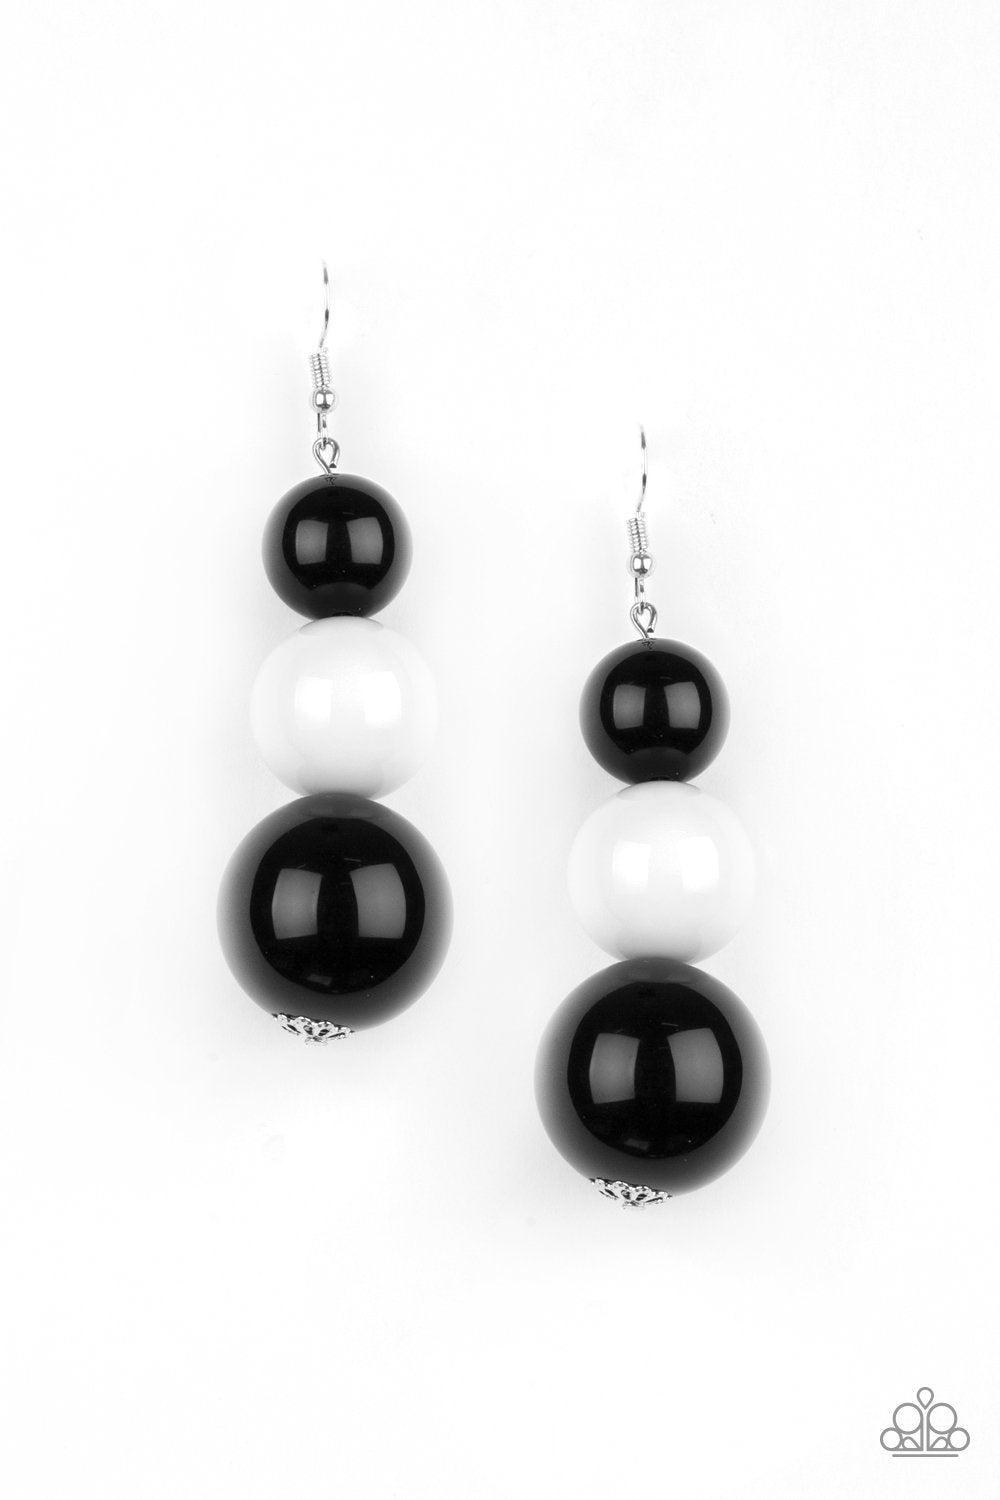 Material World Multi - Black and White Earrings - Paparazzi Accessories - lightbox -CarasShop.com - $5 Jewelry by Cara Jewels